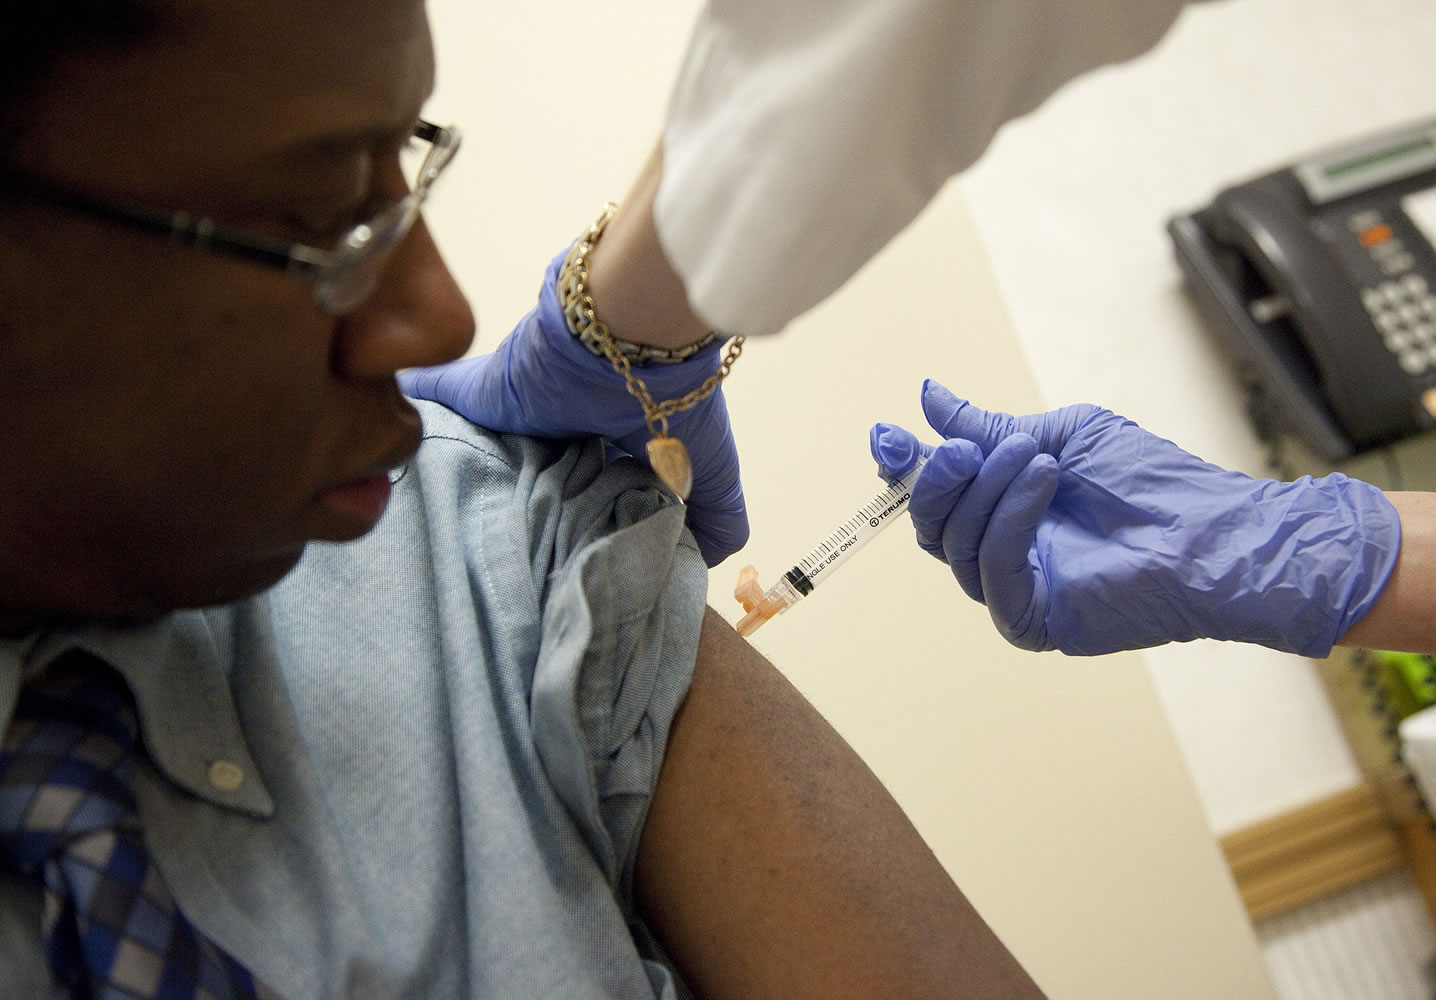 It's flu season, so time to get your vaccine shot.